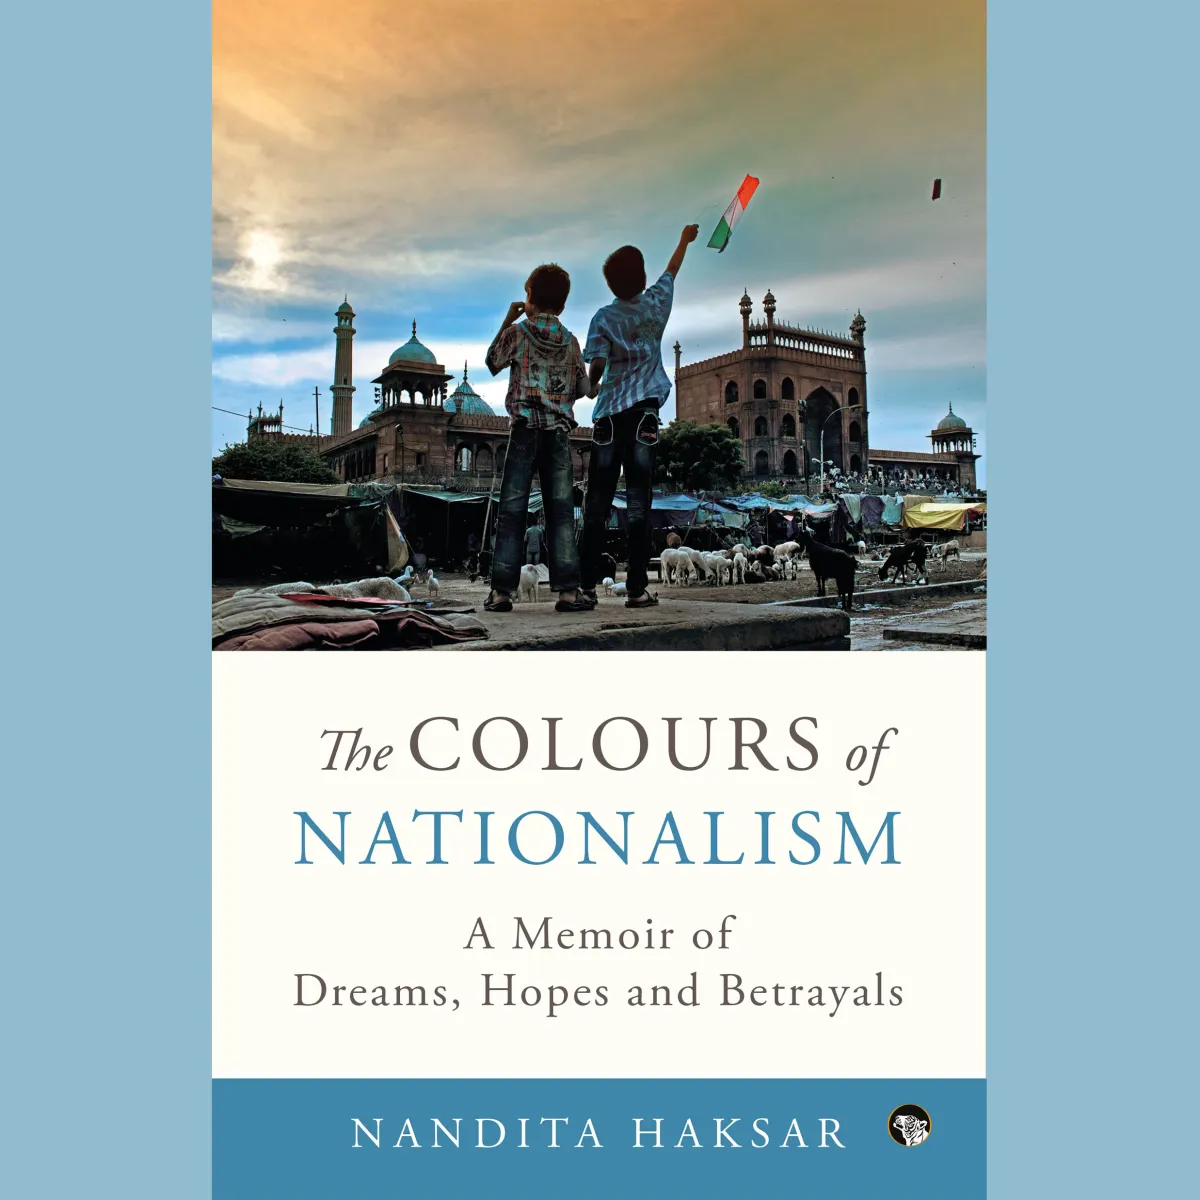 The Colours of Nationalism: An Excerpt